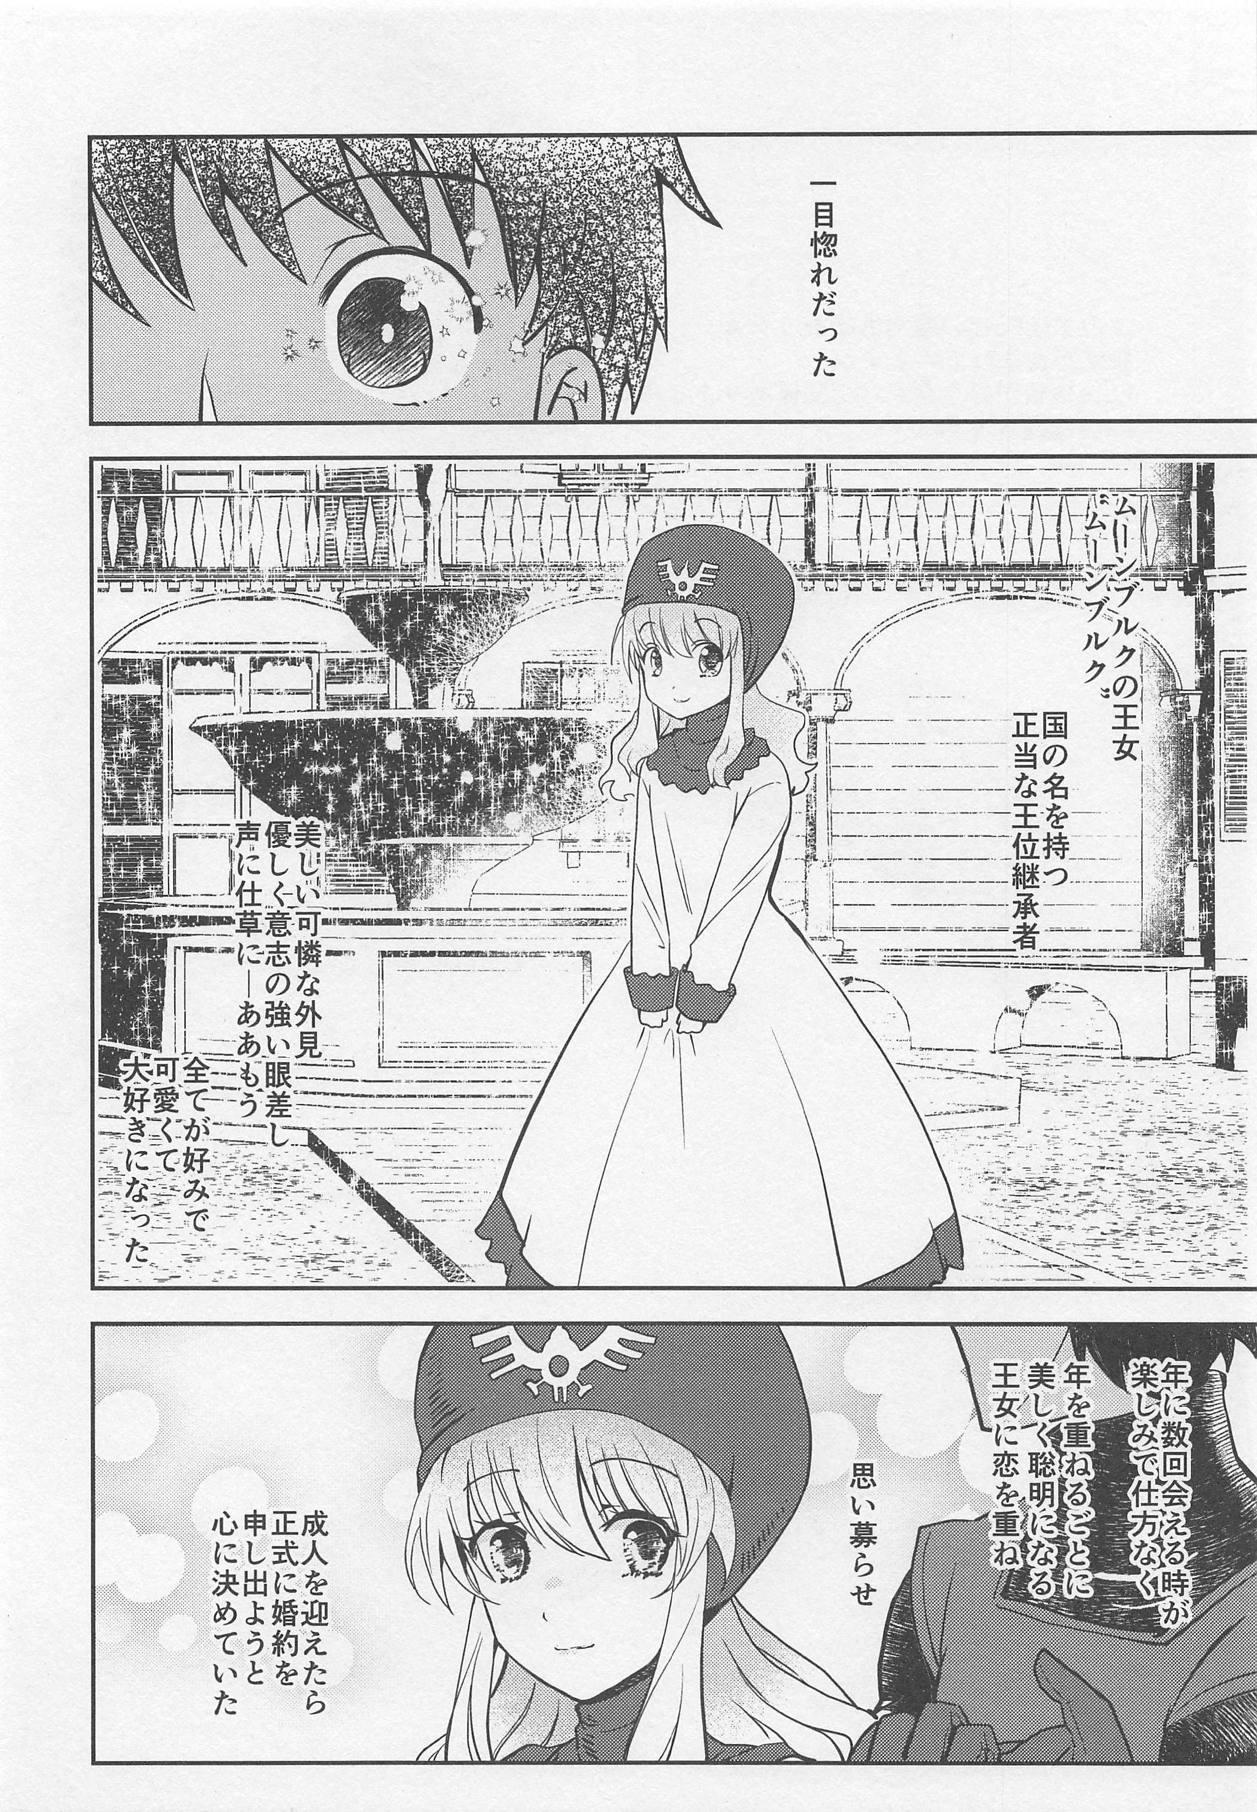 Best Blowjobs Ever Moonbrooke Oujo to Maryoku Kyoukyuu - Dragon quest ii Free Rough Porn - Page 3